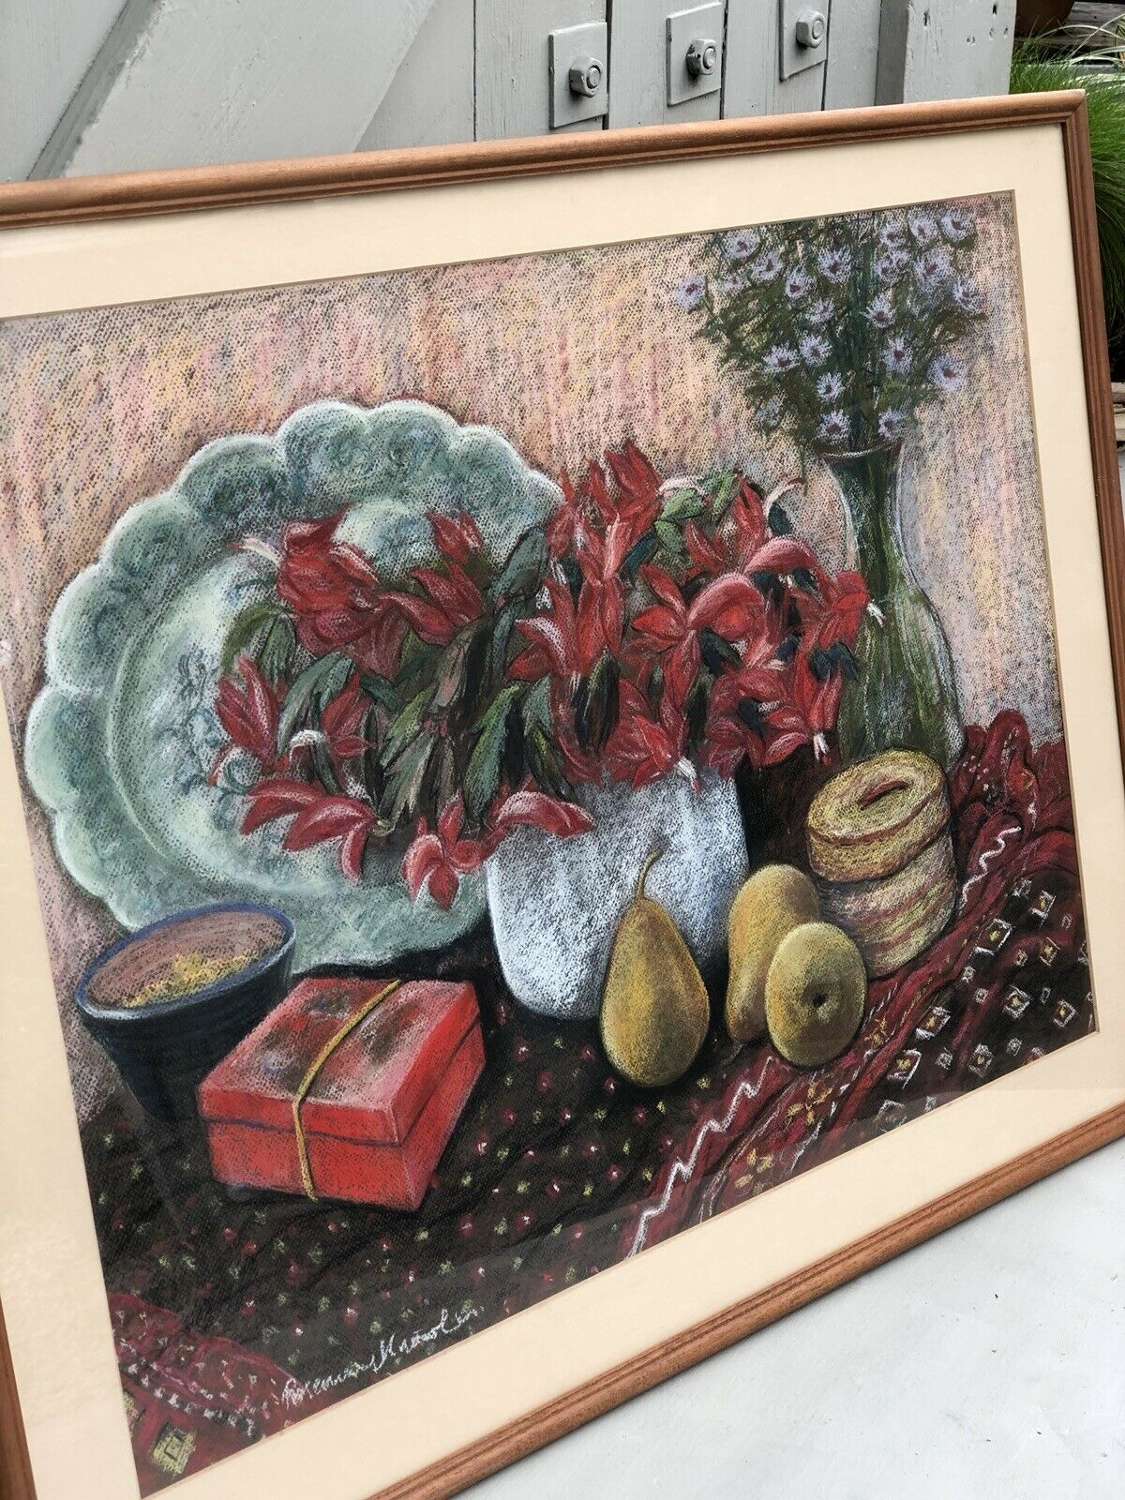 Vintage Still Life Pastel Painting Under Glass Rosemary Knowles.